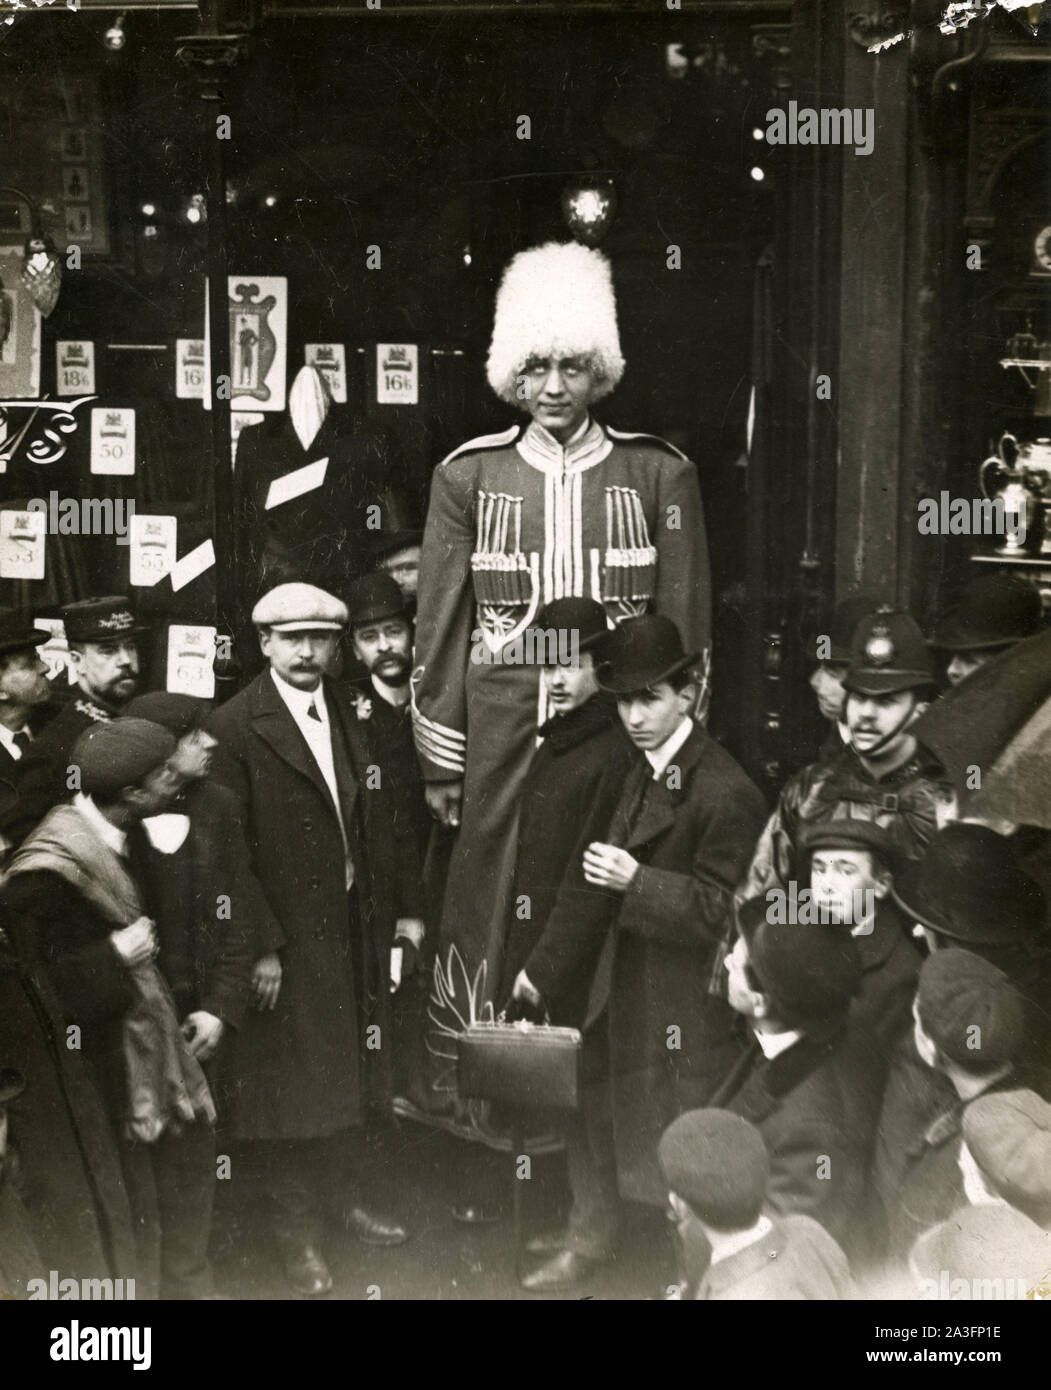 Ivan Markoff, who was famous as a Russian cossack giant in the early 20th century. Markoff is seen in London where the caption says he was being fitted for a new suit. He was reputed to be 9ft tall. Stock Photo